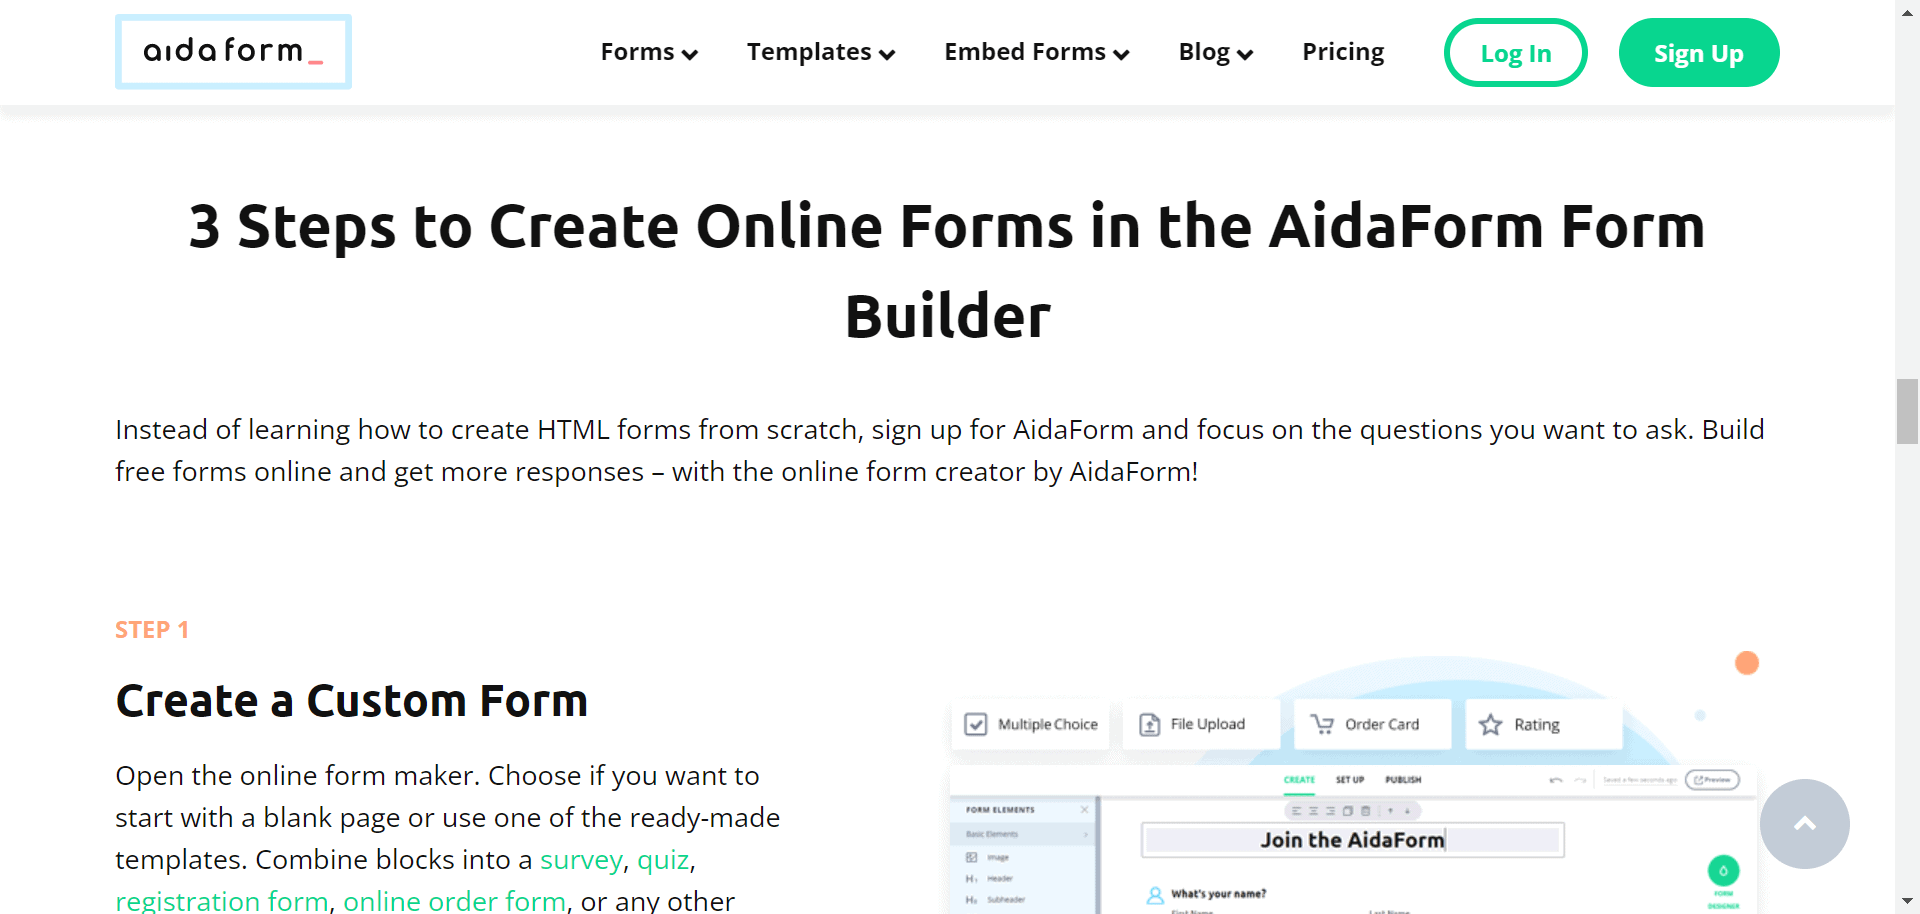 How To Make An Online Form From AidaForm